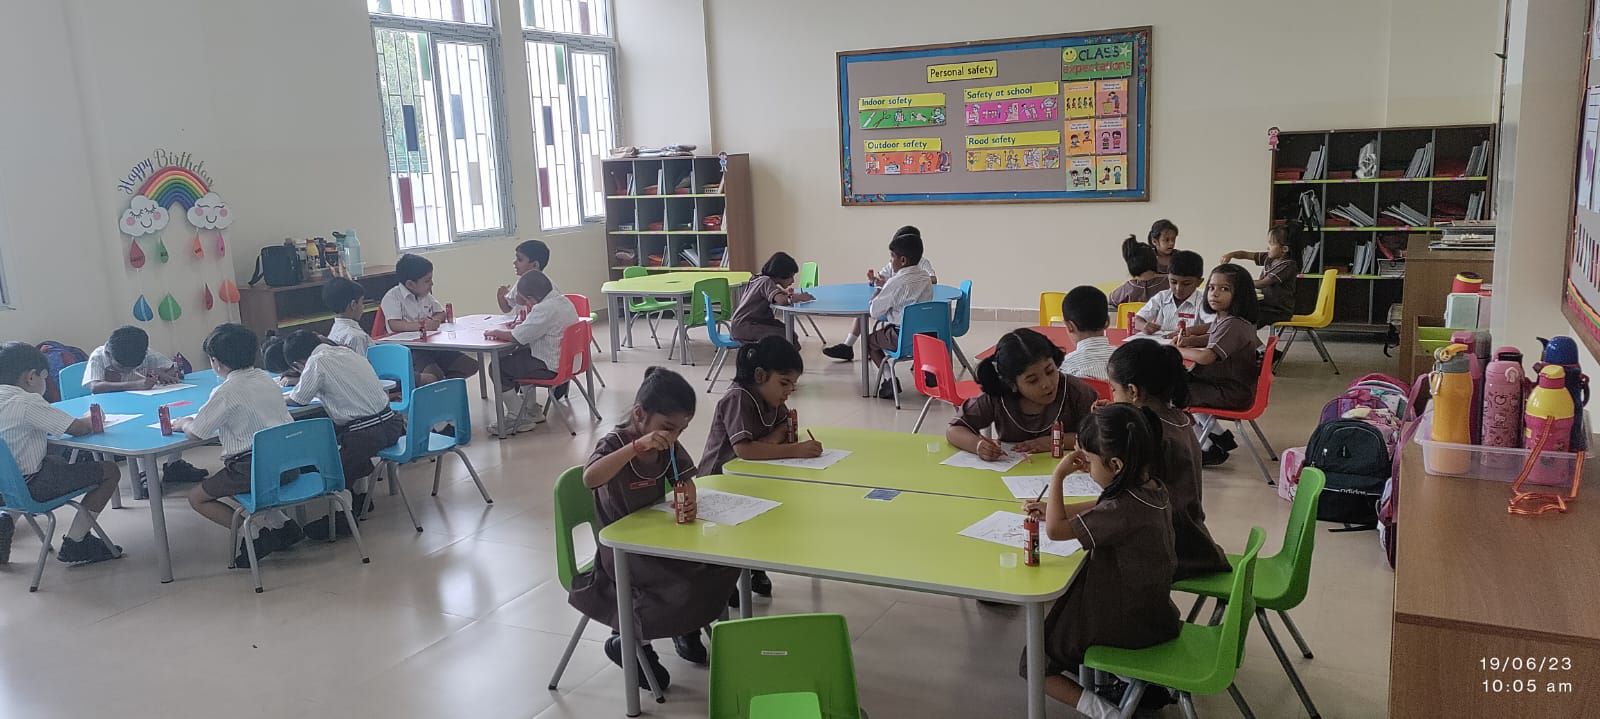 FIRST DAY AT SCHOOL – KG 2 